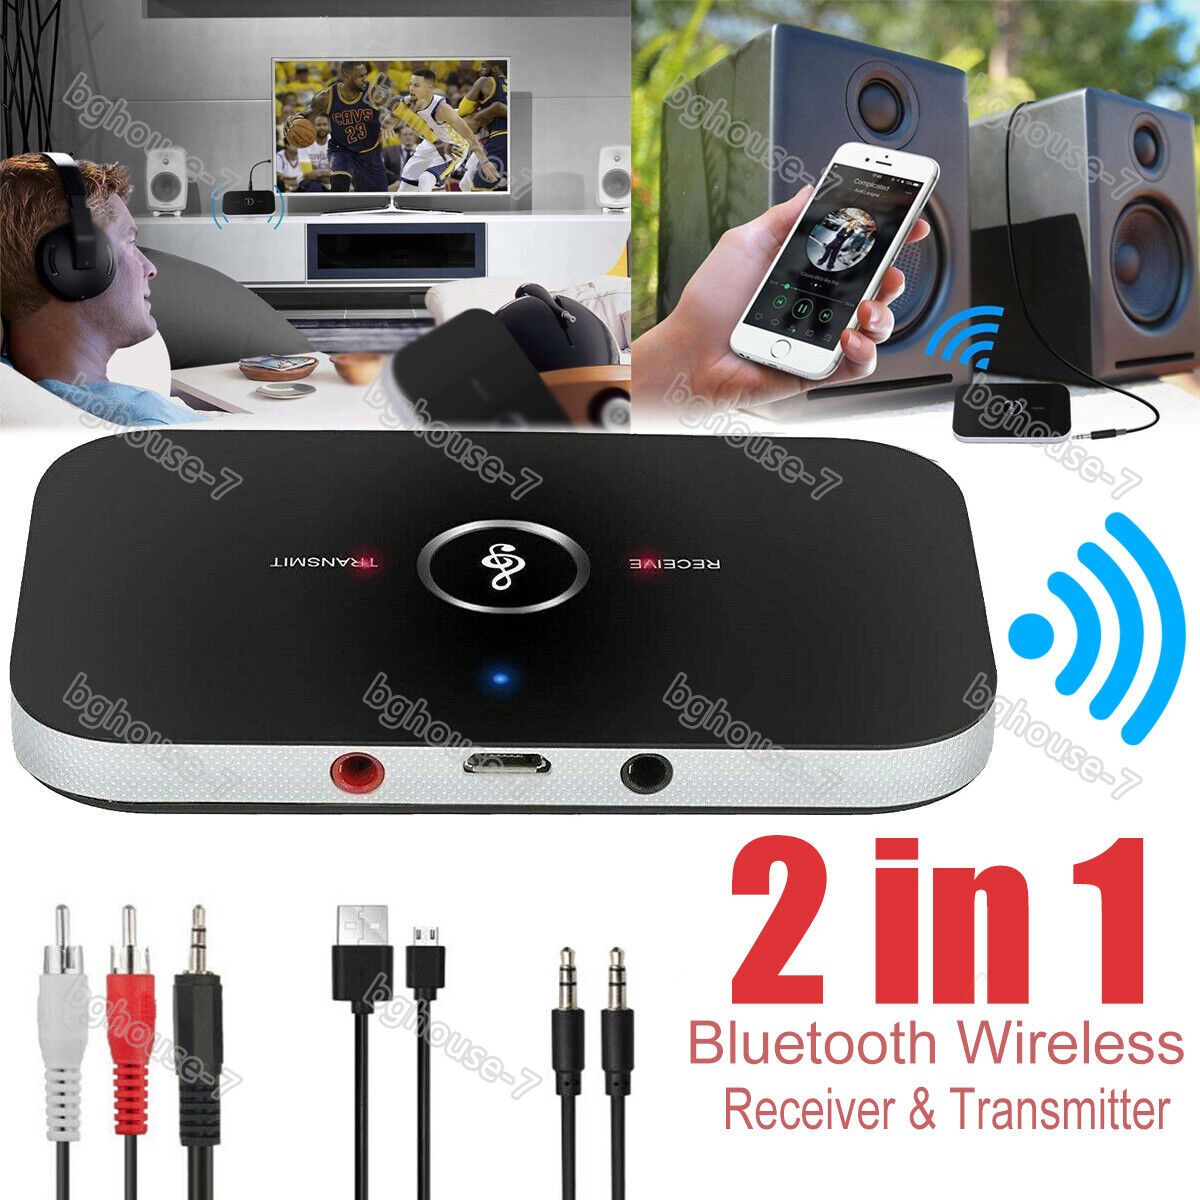 Bluetooth Receiver & Transmitter Wireless 3.5mm Aux Audio Adapter Car TV Stereo